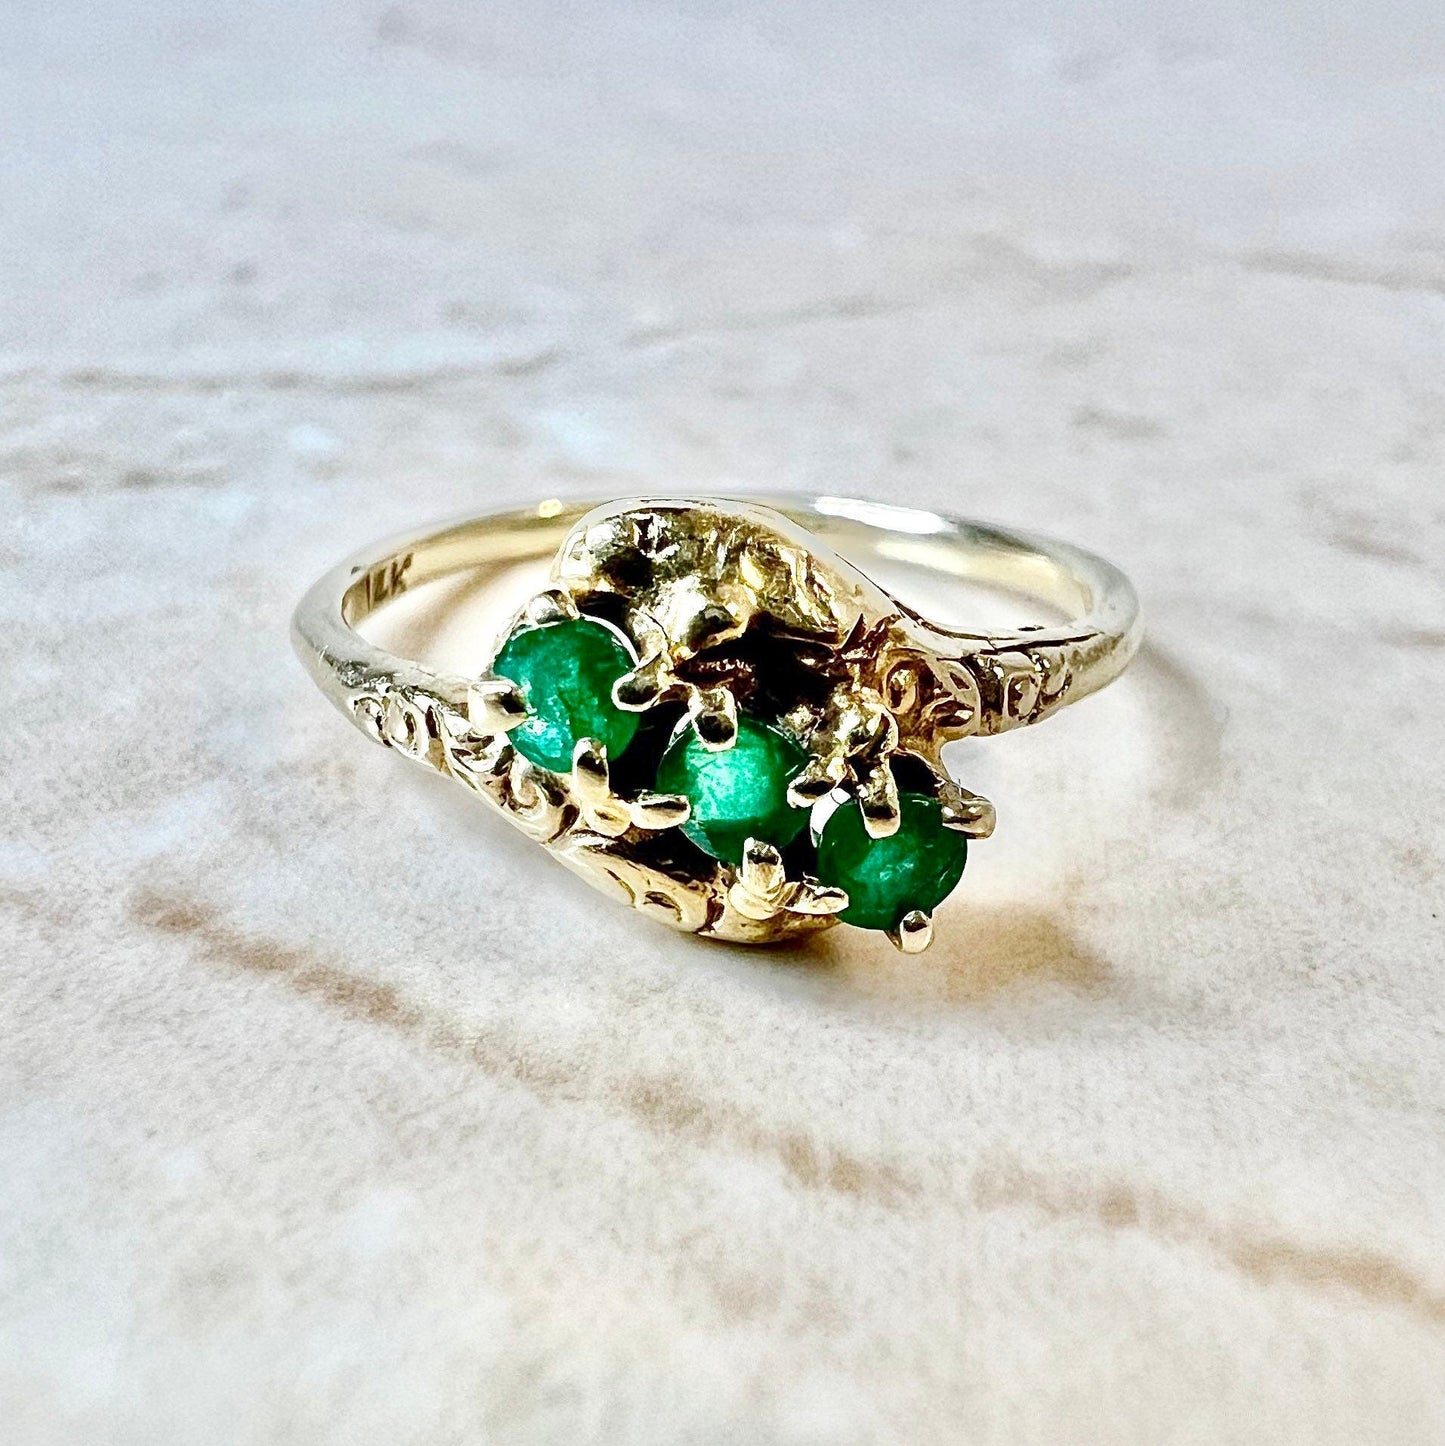 Antique 14 Karat Yellow Gold Natural Emerald Ring - Emerald Cocktail Ring - Three Stone Emerald Ring - May Birthstone - Best Gifts For Her